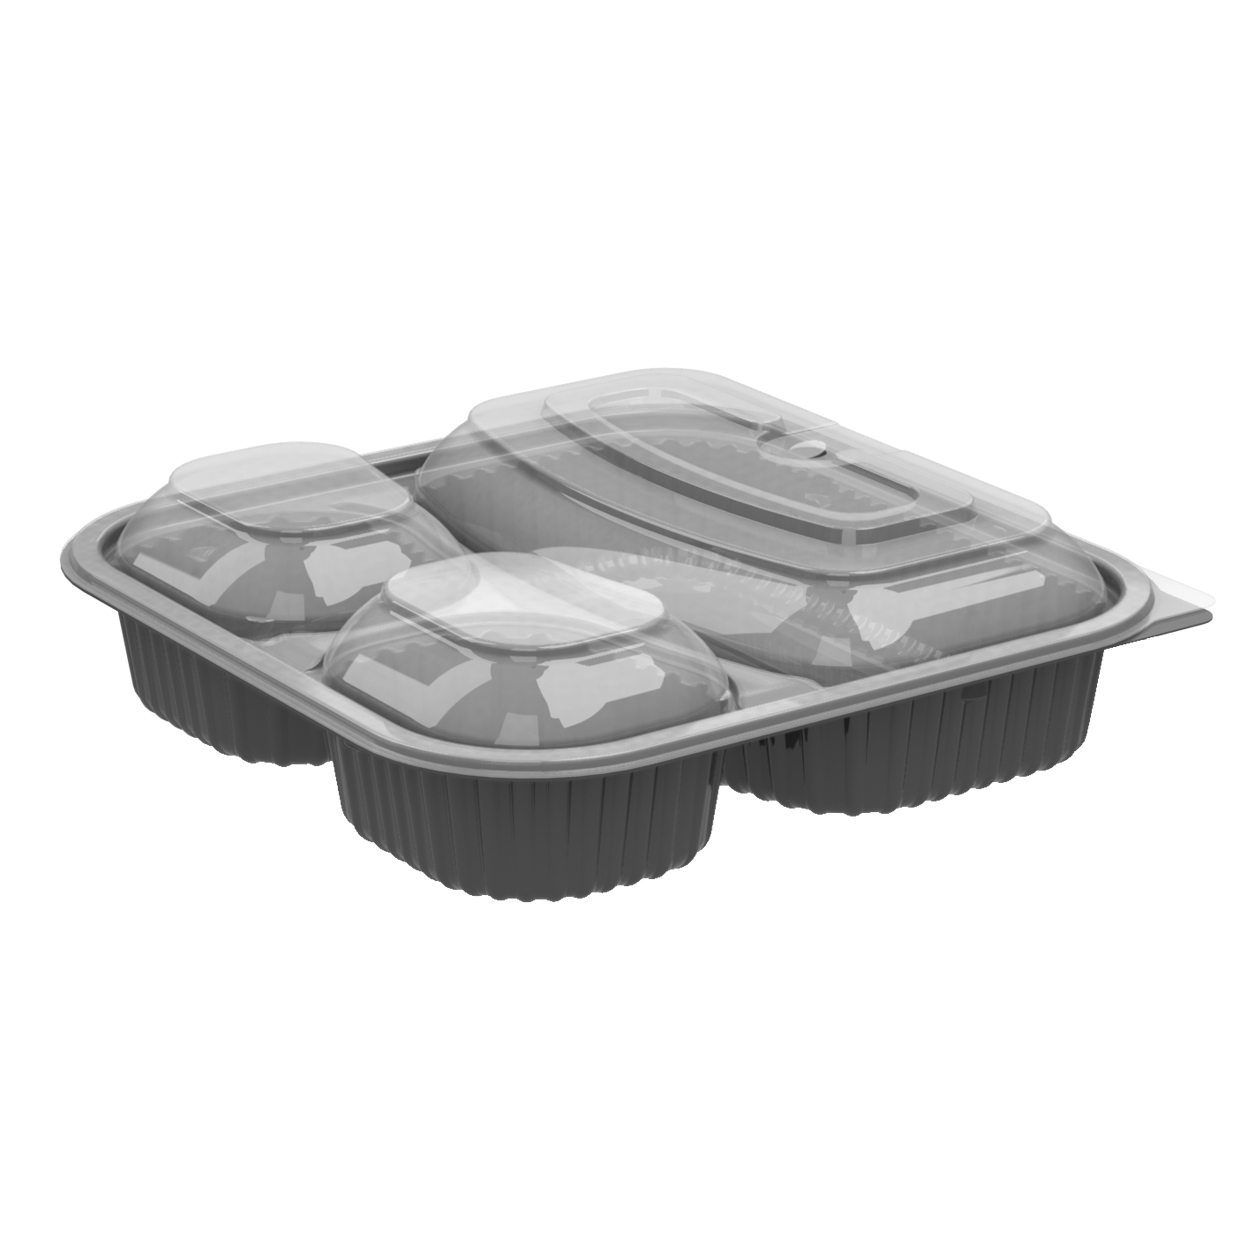 4118523 CDS8533 Culinary
Squares Combo Microwaveable
Black 3 Comp. Containers with
Clear Lids - 150